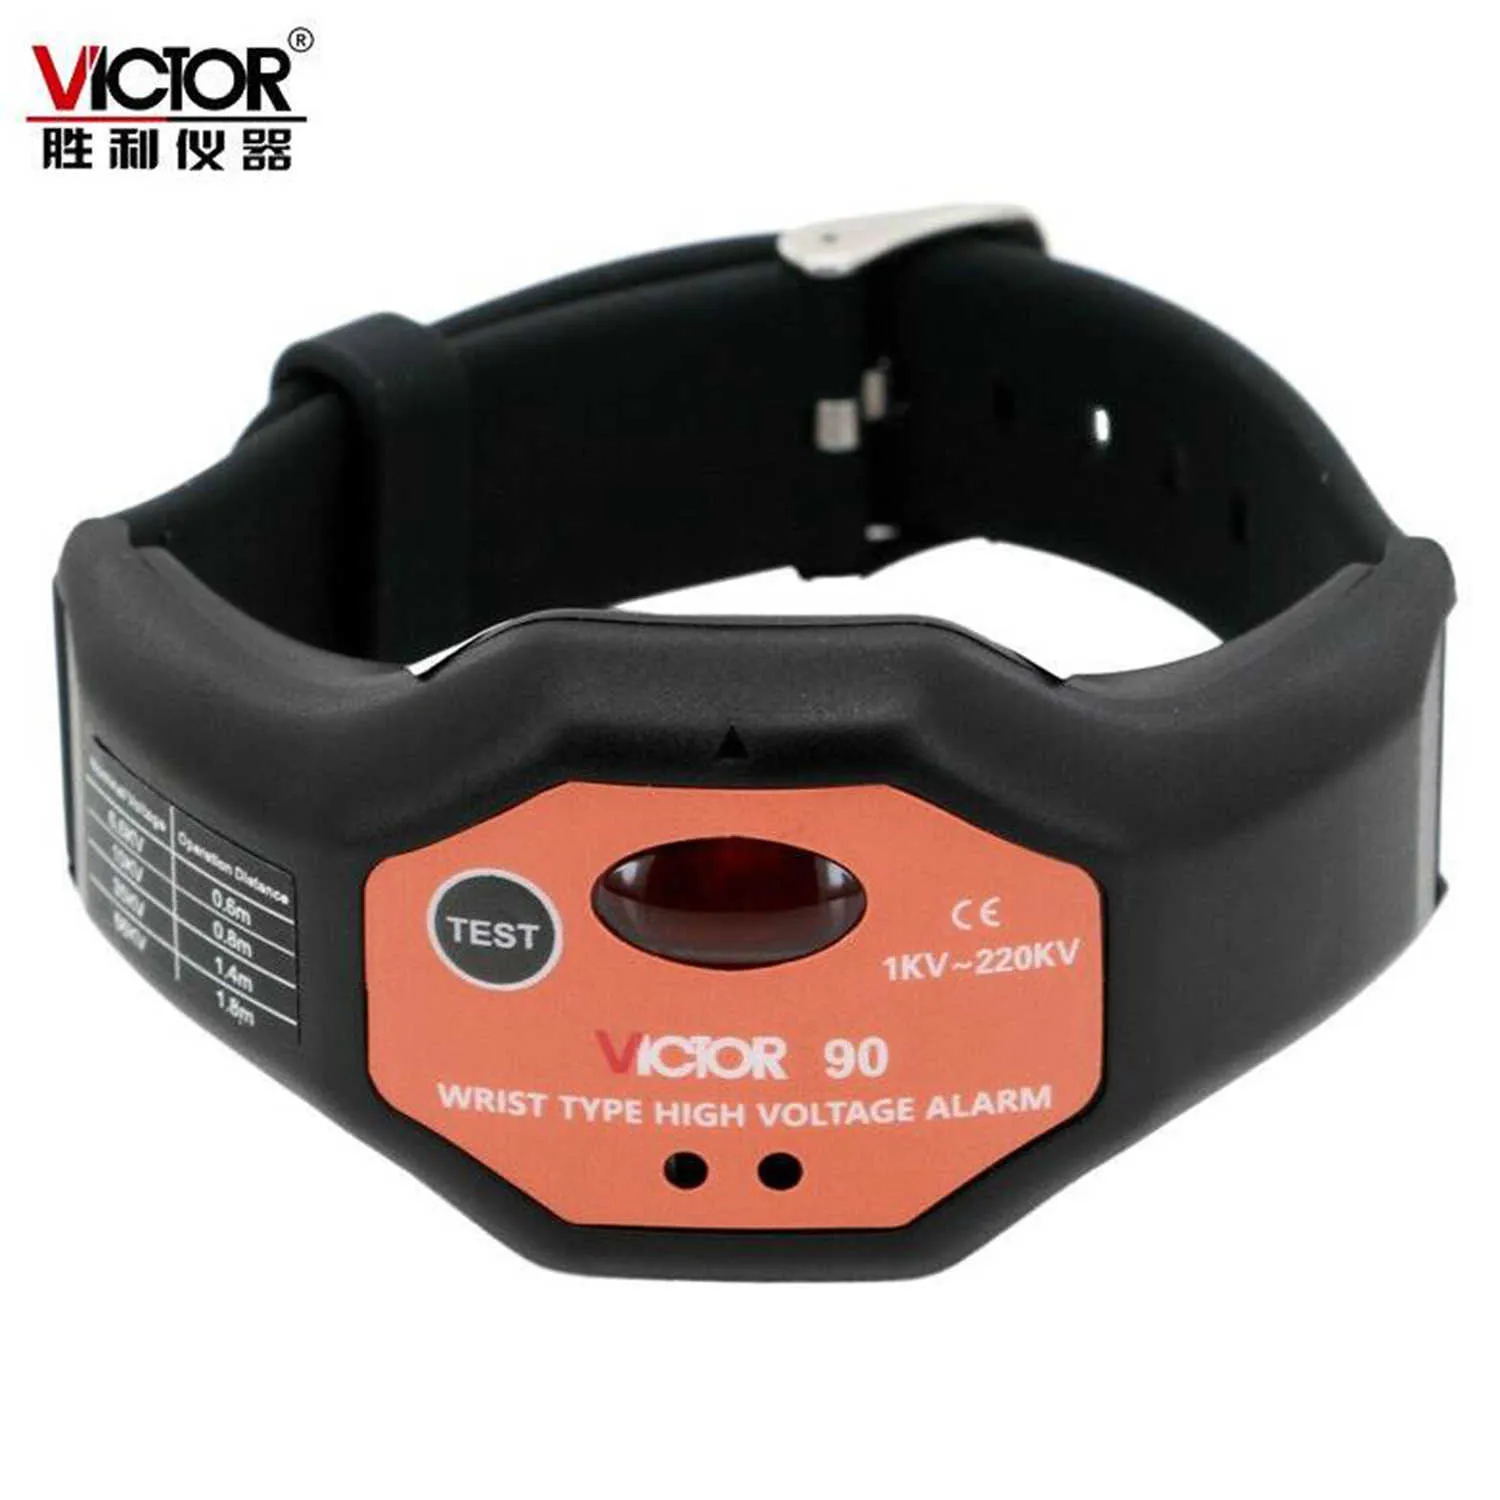 VICTOR 90 VC90 Wrist-Type High-Voltage Alarm Non-Contact Detection Induction Technology.